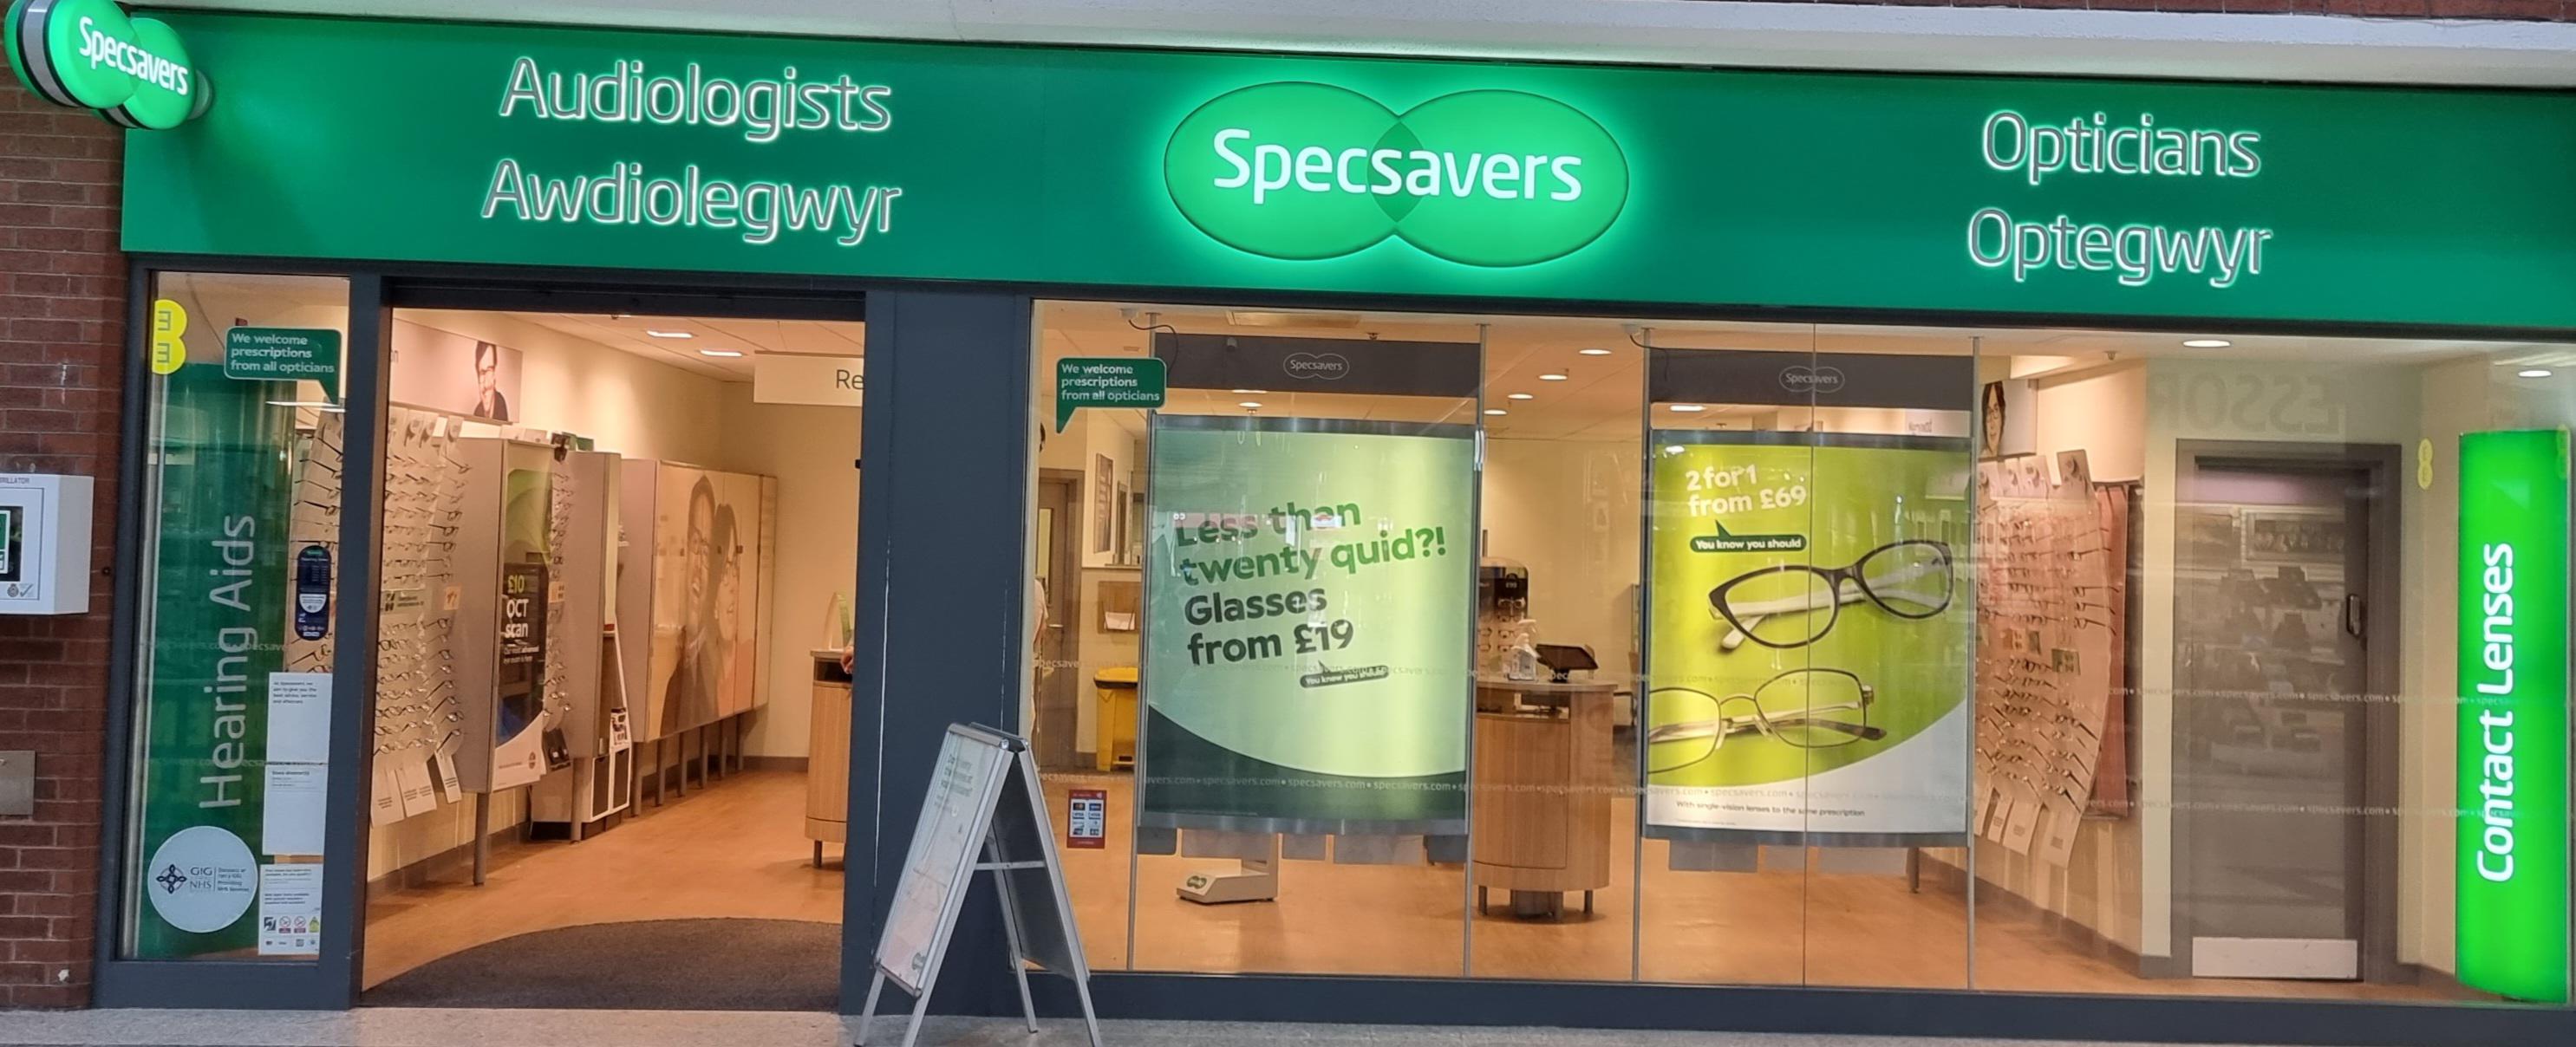 Specsavers Rhyl Specsavers Opticians and Audiologists - Rhyl Rhyl 01745 343200